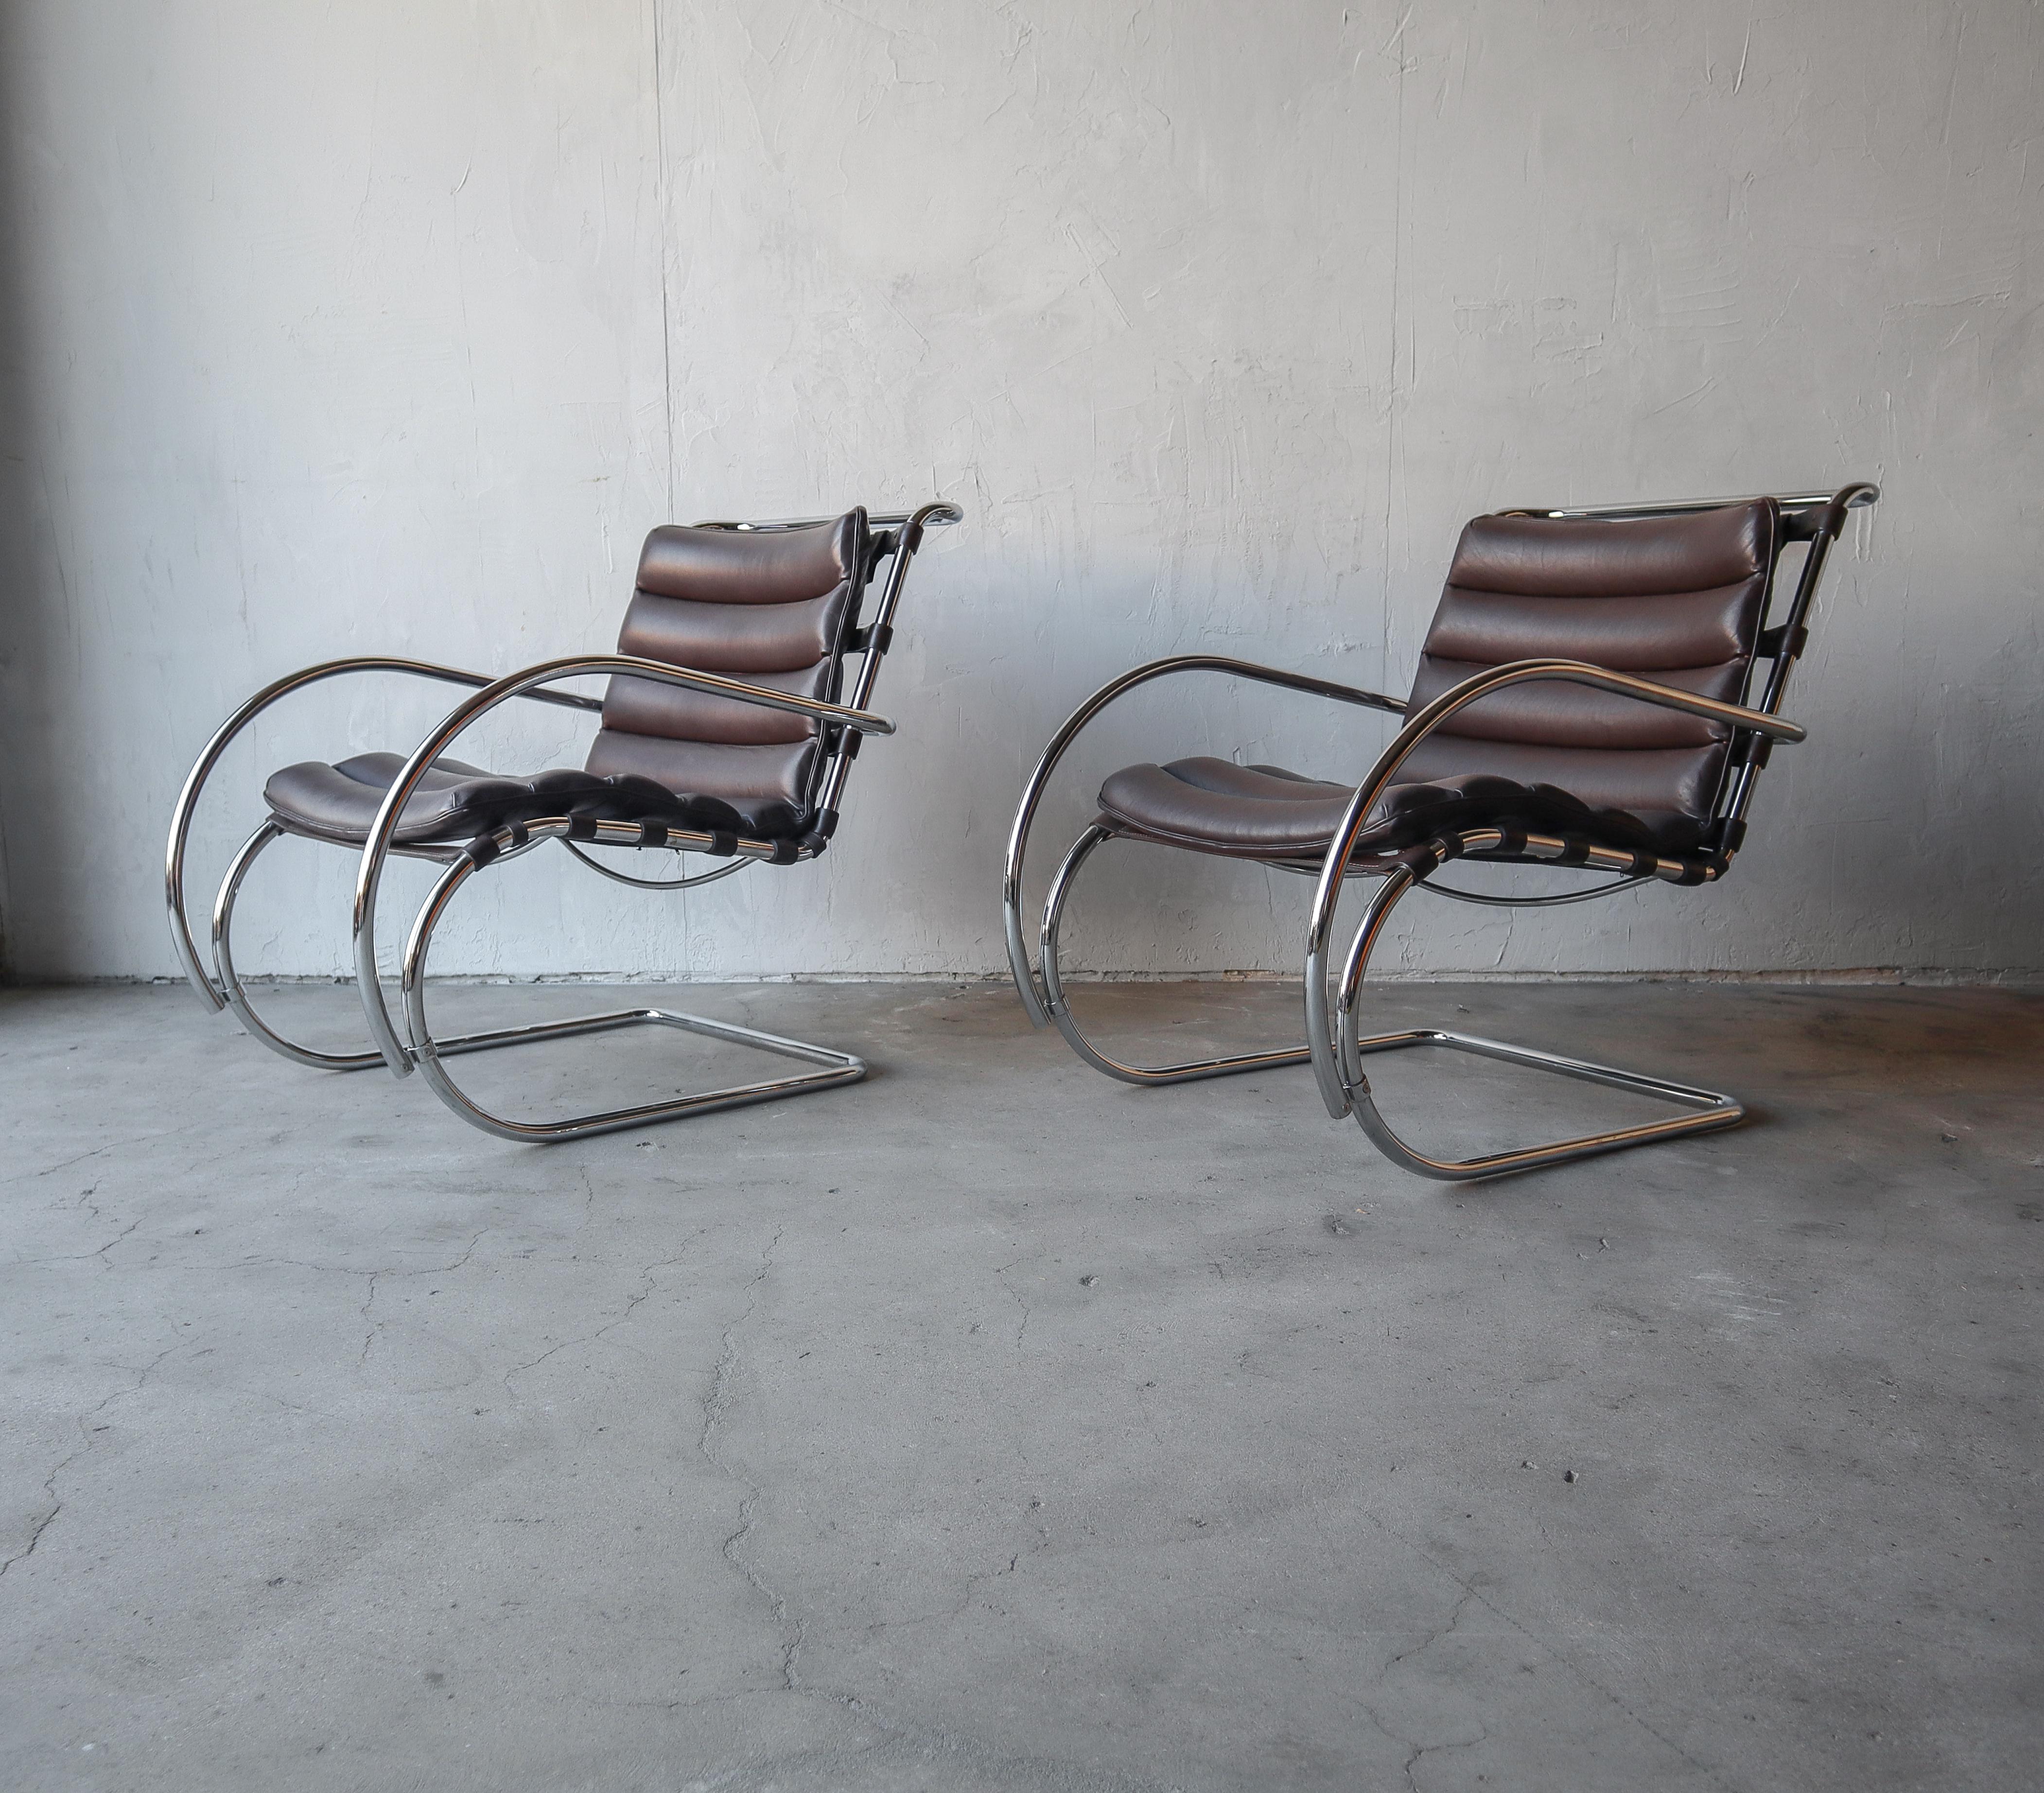 Vintage Bauhaus leather MR lounge chairs, with arms, by Ludwig Mies van der Rohe for Knoll. Chairs are in great overall condition, the brown leather shows some light wear, the chrome is bright and free of any notable damage.